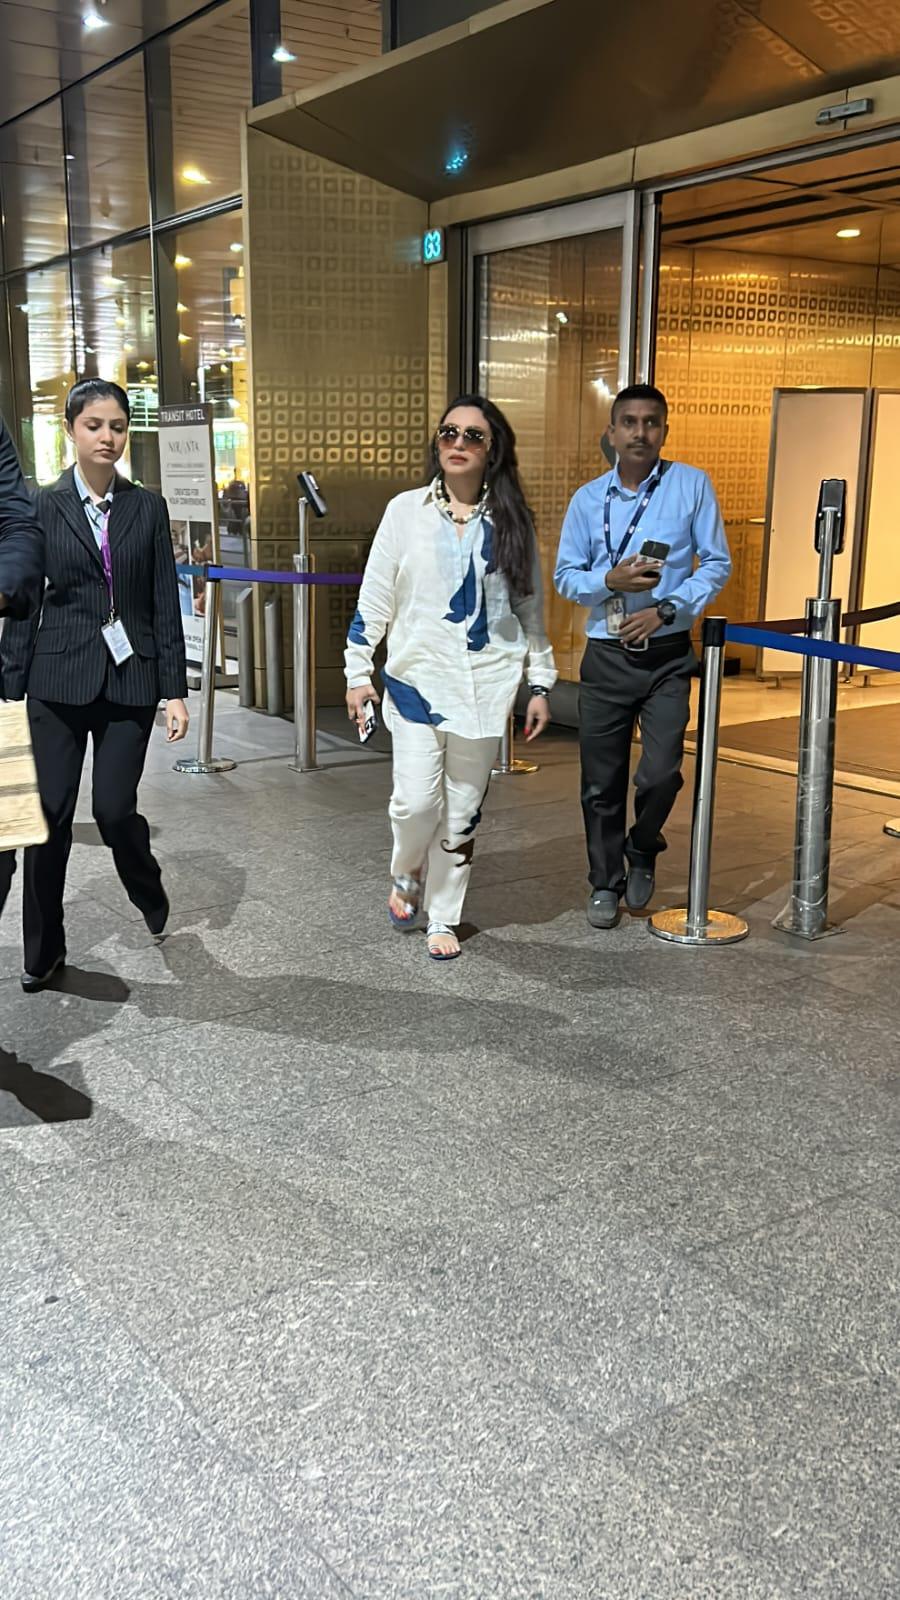 Rani Mukerji was clicked at the Mumbai airport. The actress wore a chic shirt and loose pants for the comfy look